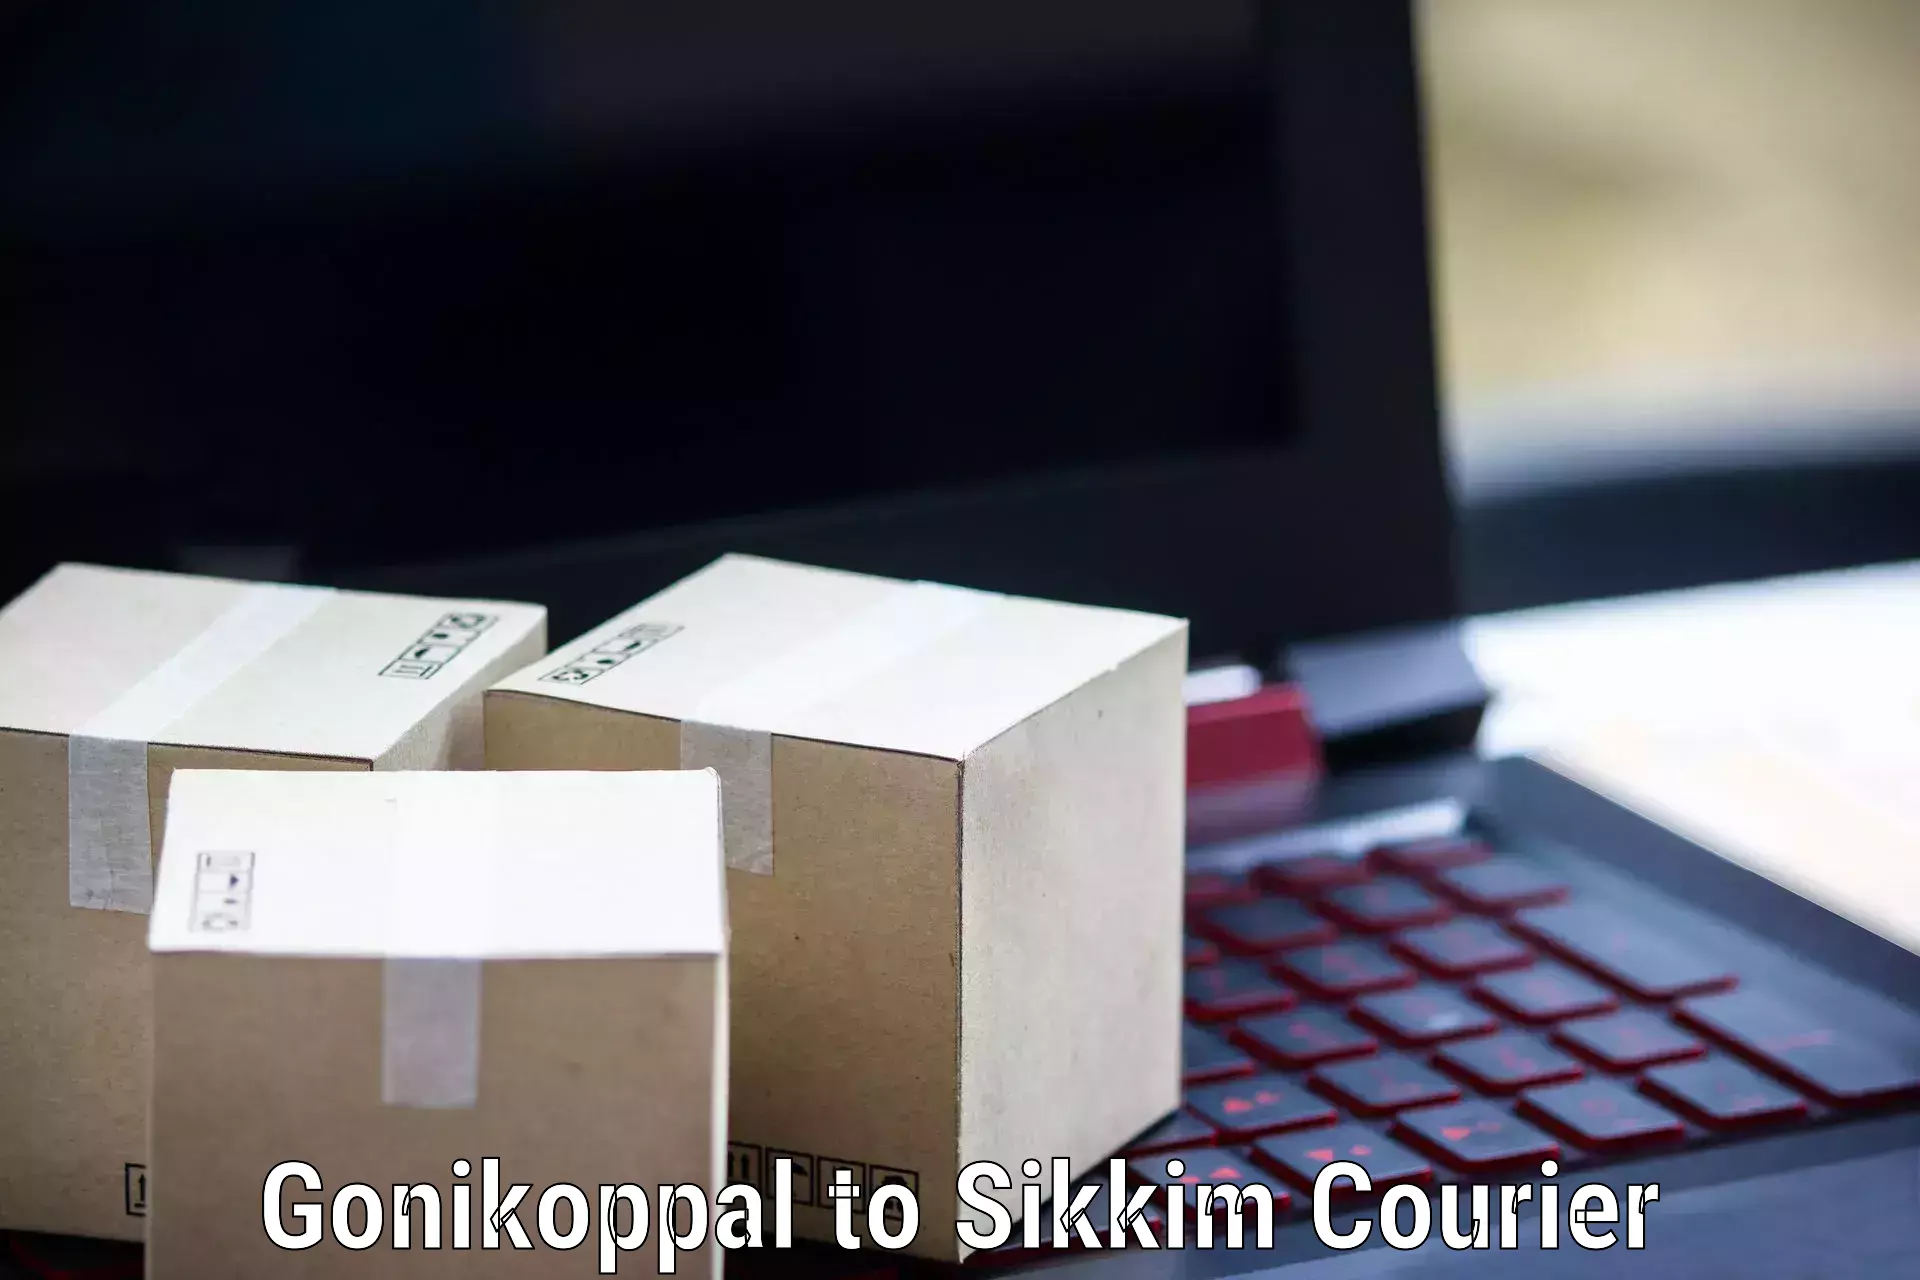 On-demand shipping options Gonikoppal to Pelling